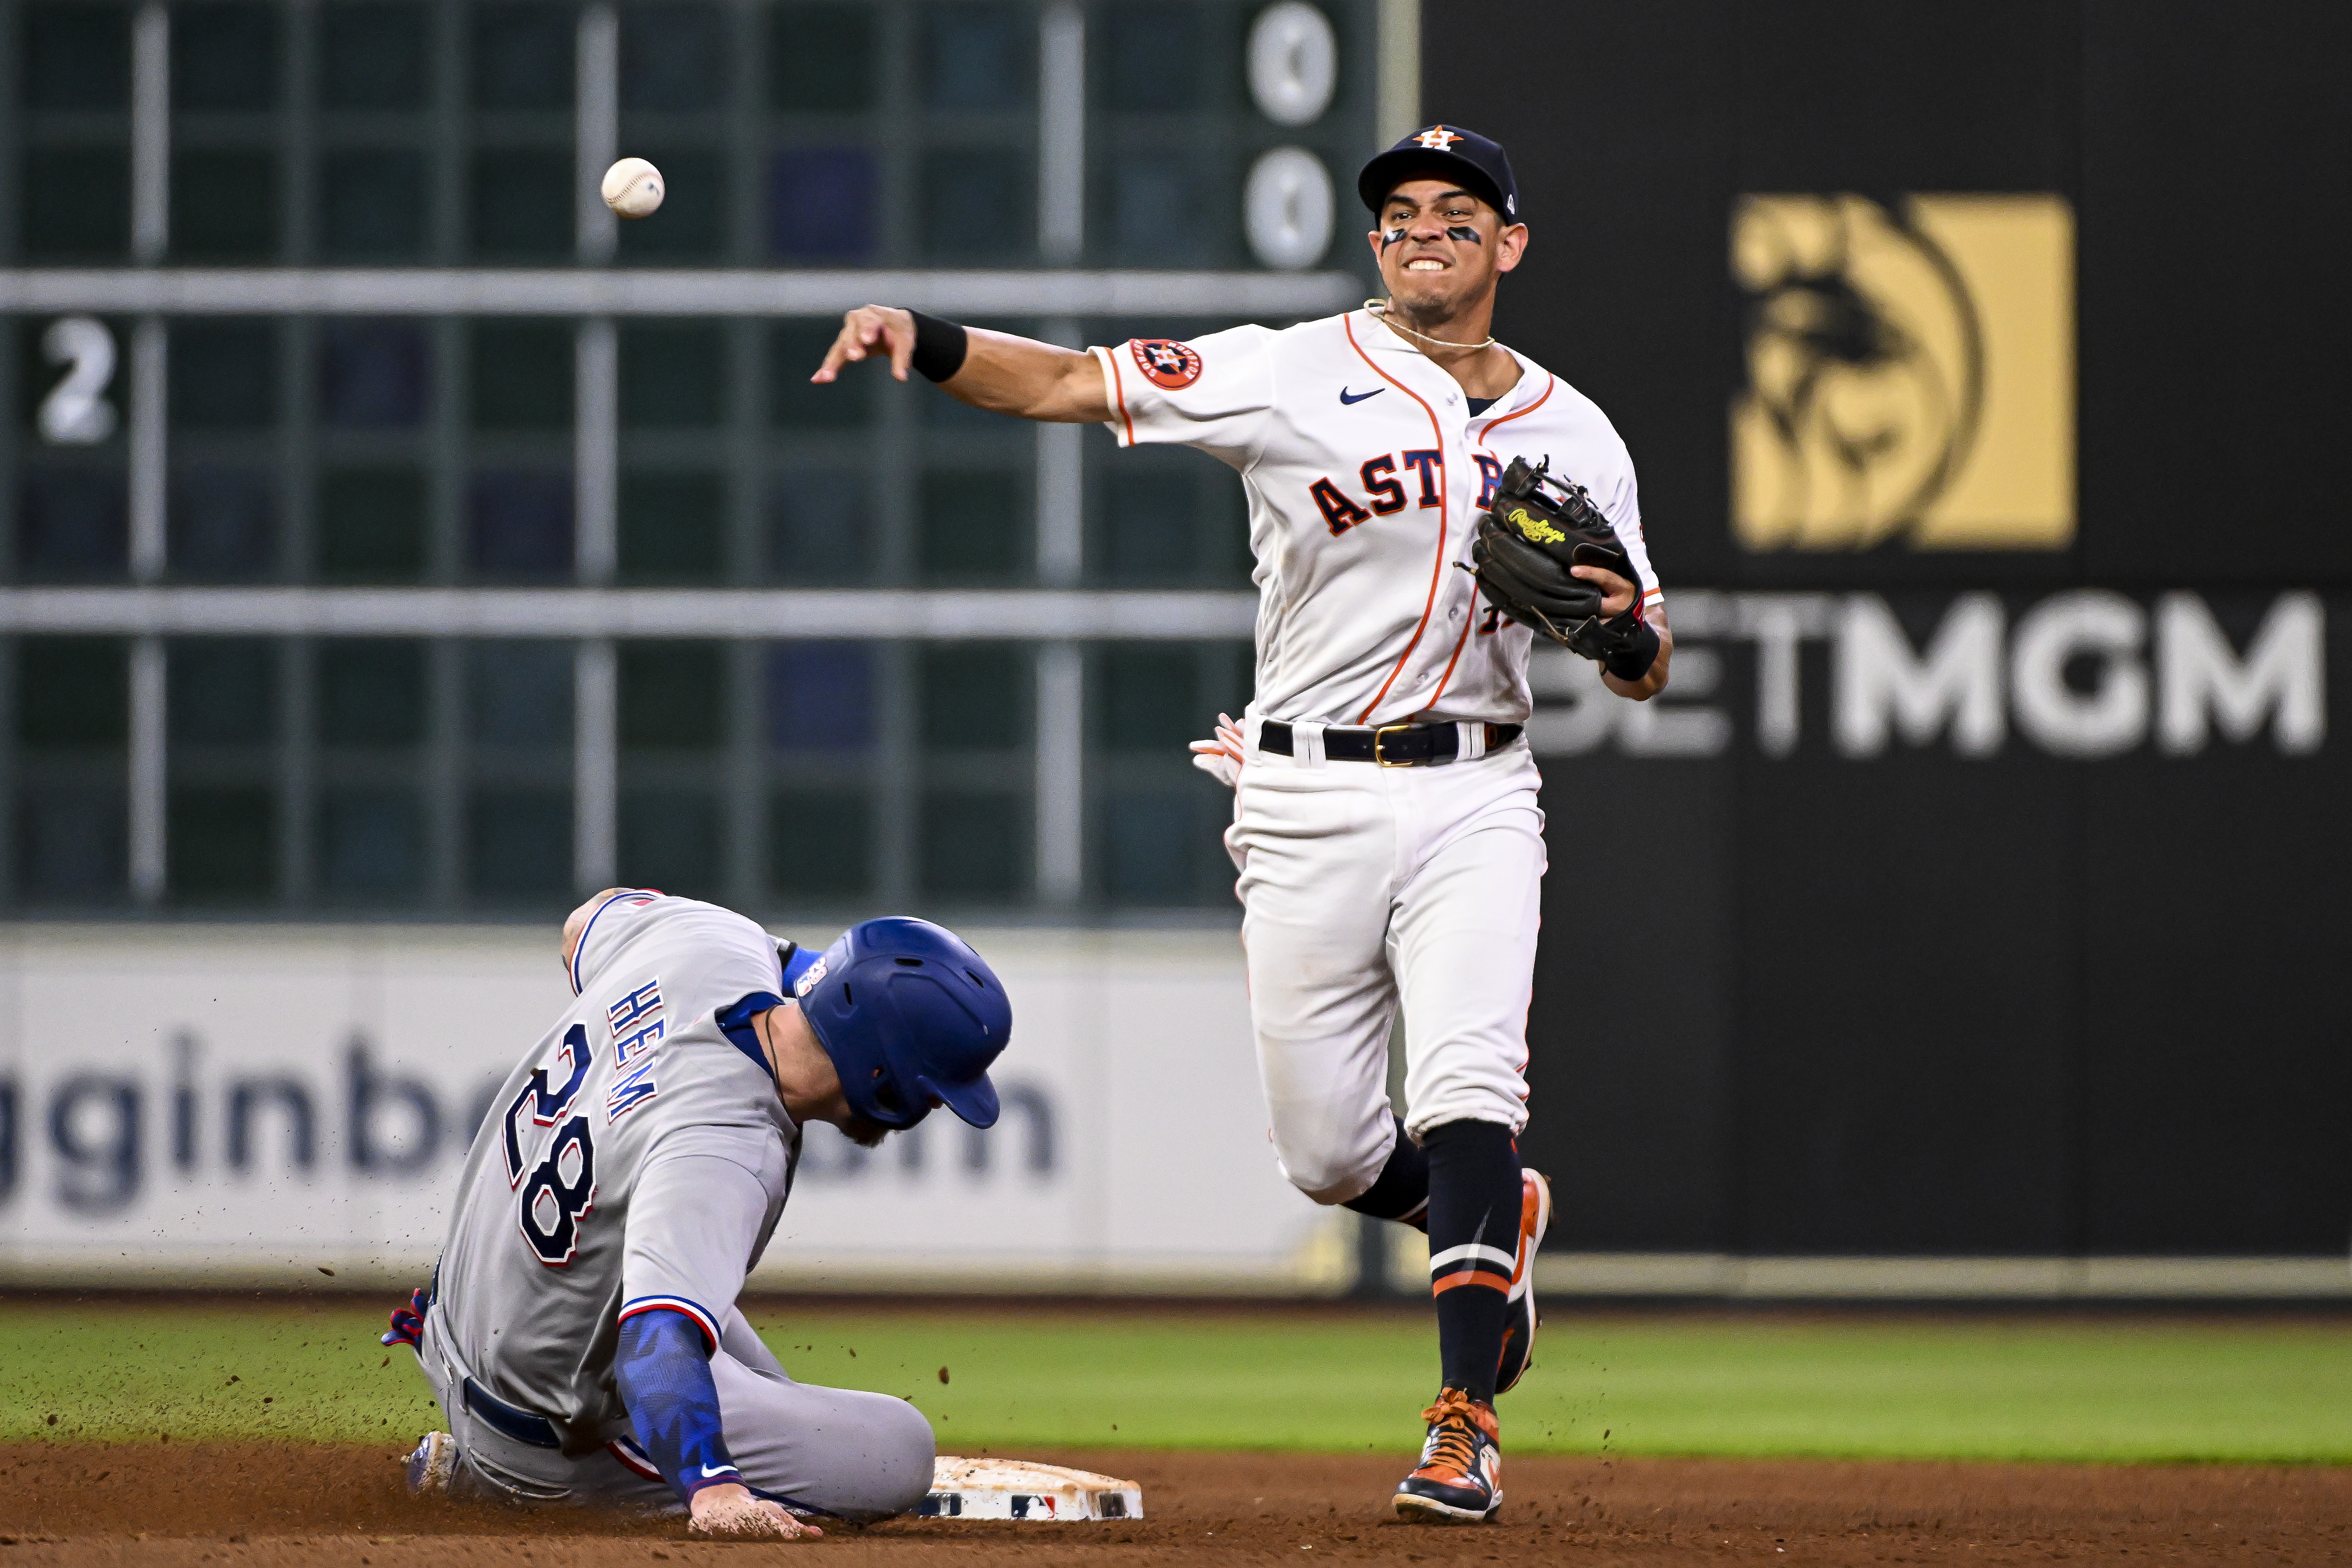 Houston Astros: Kyle Tucker now has a chance to prove his worth